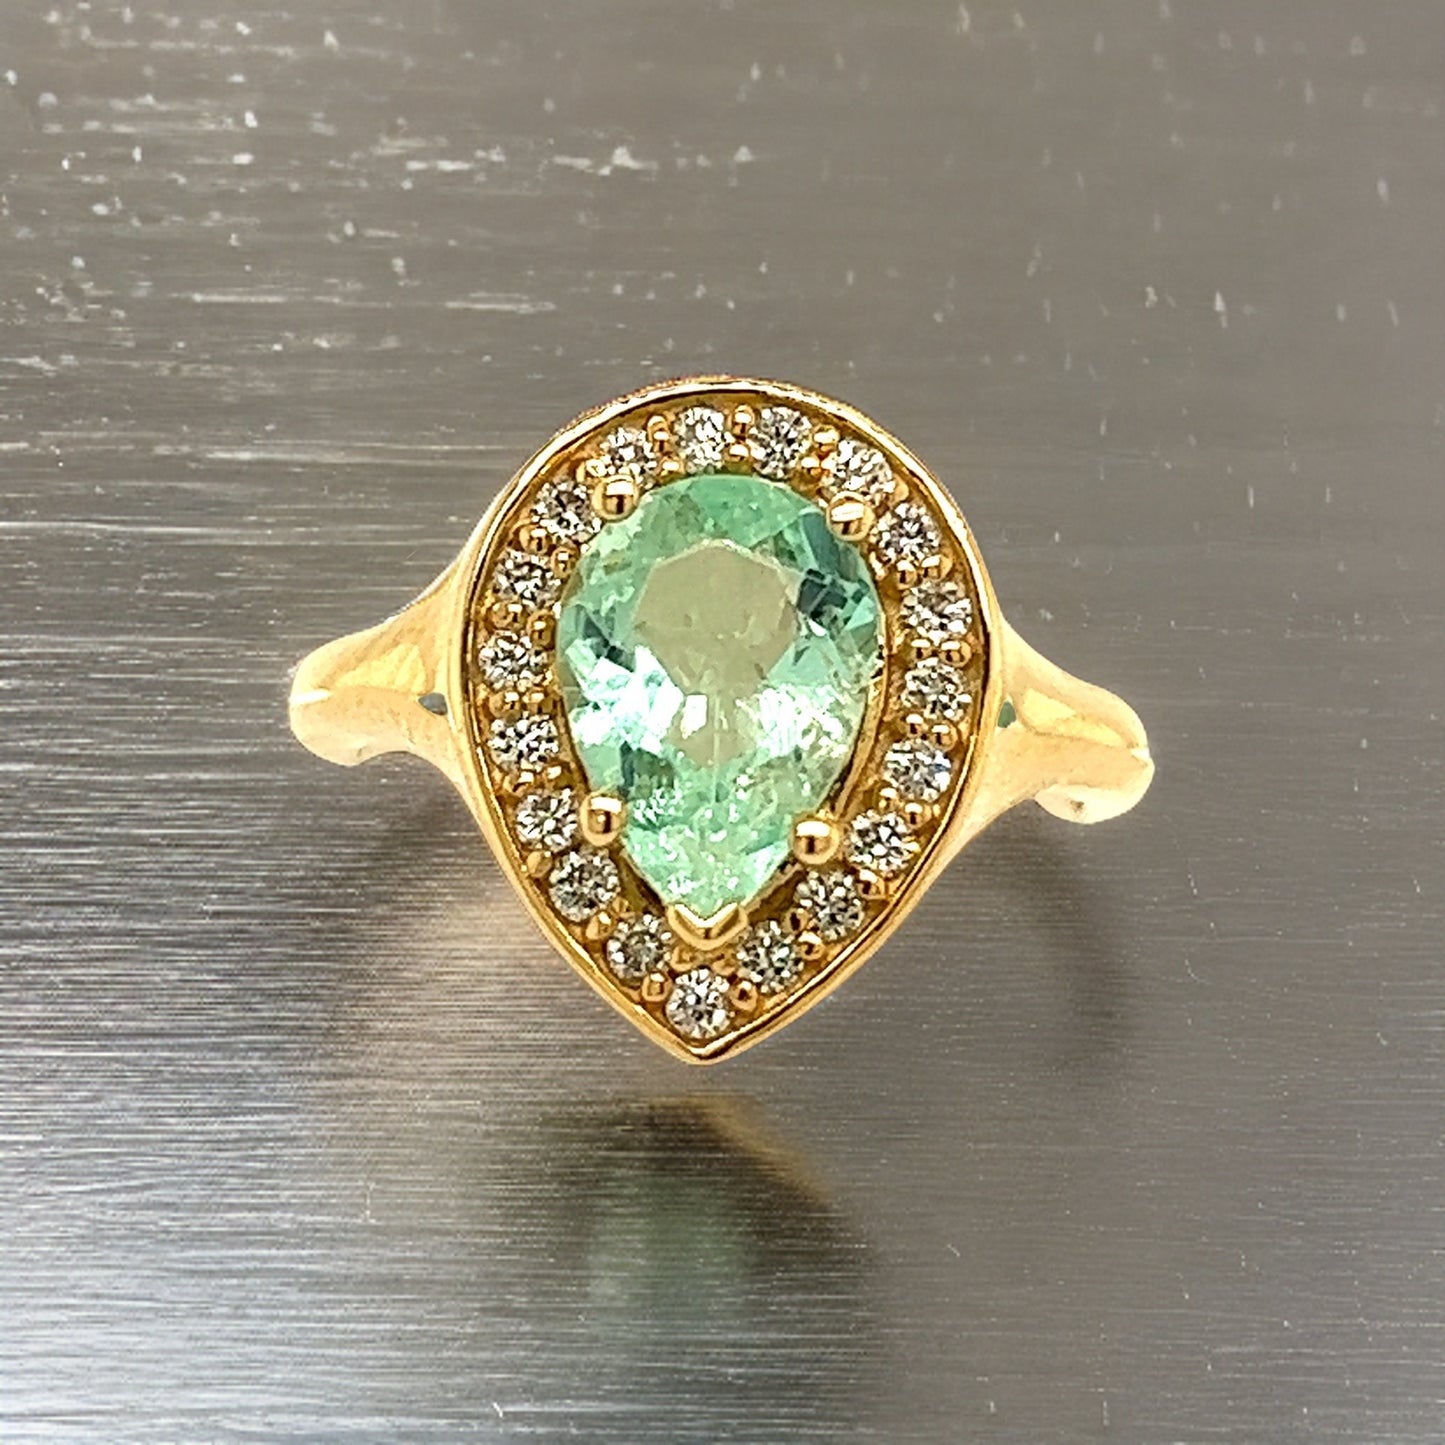 Natural Emerald Diamond Ring Size 6.5 14k Y Gold 1.74 TCW Certified $4,950 216677 - Certified Fine Jewelry